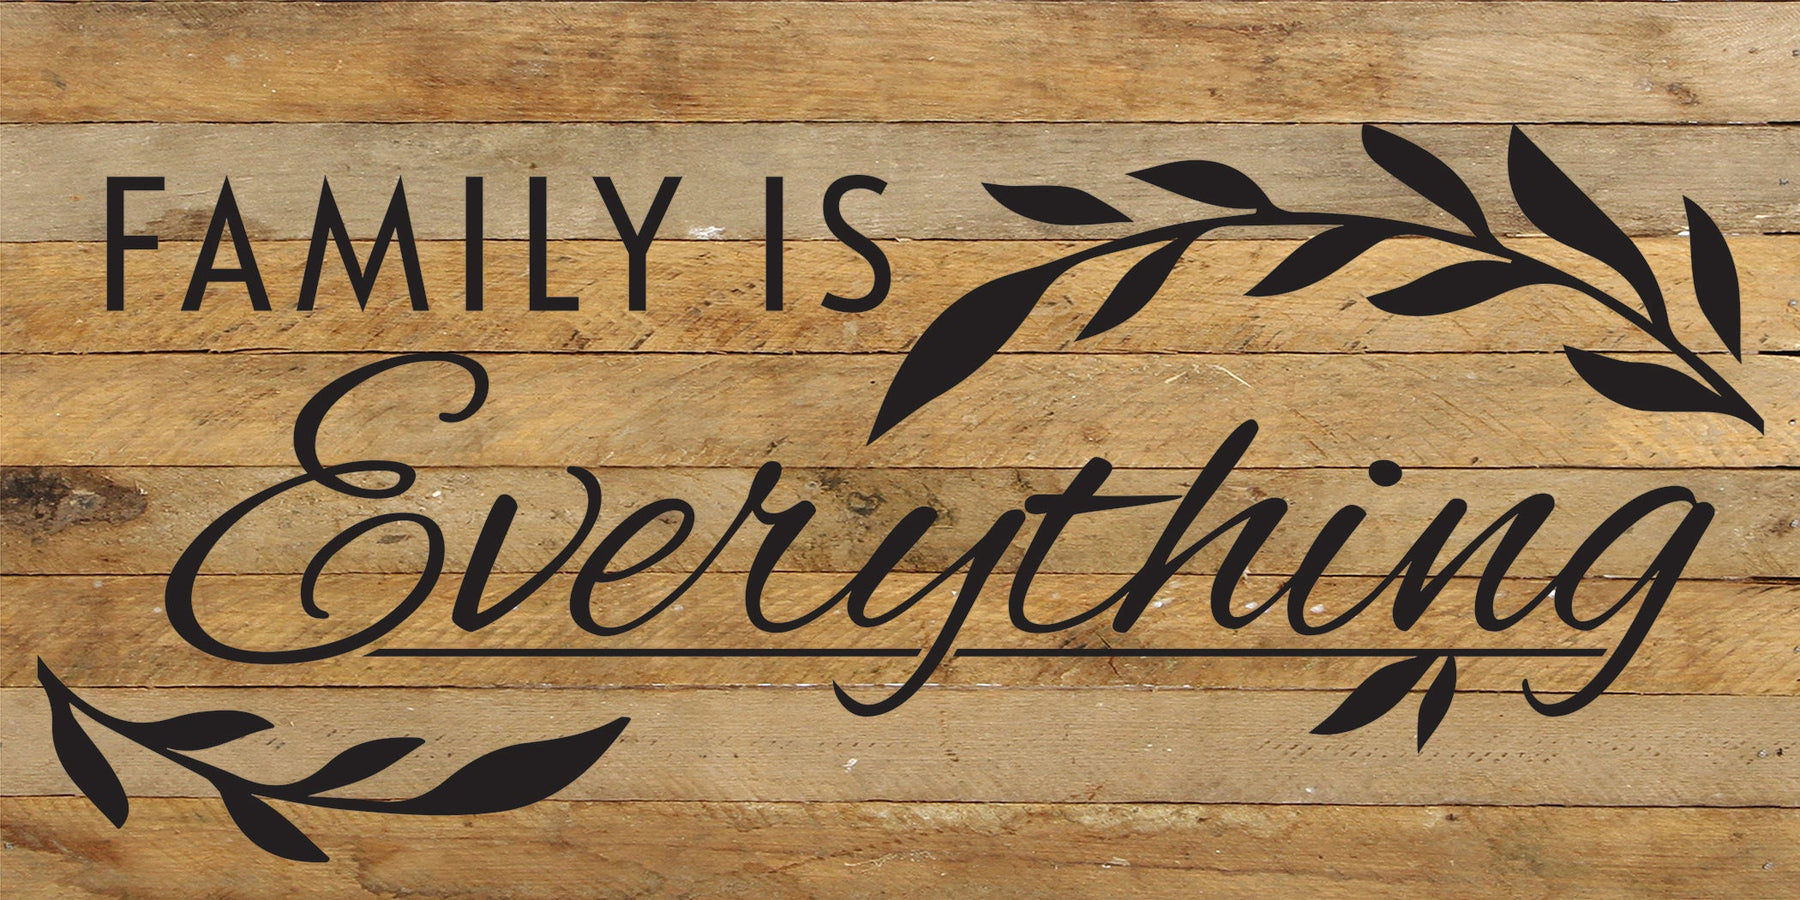 Family is everything / 24x12 Reclaimed Wood Sign